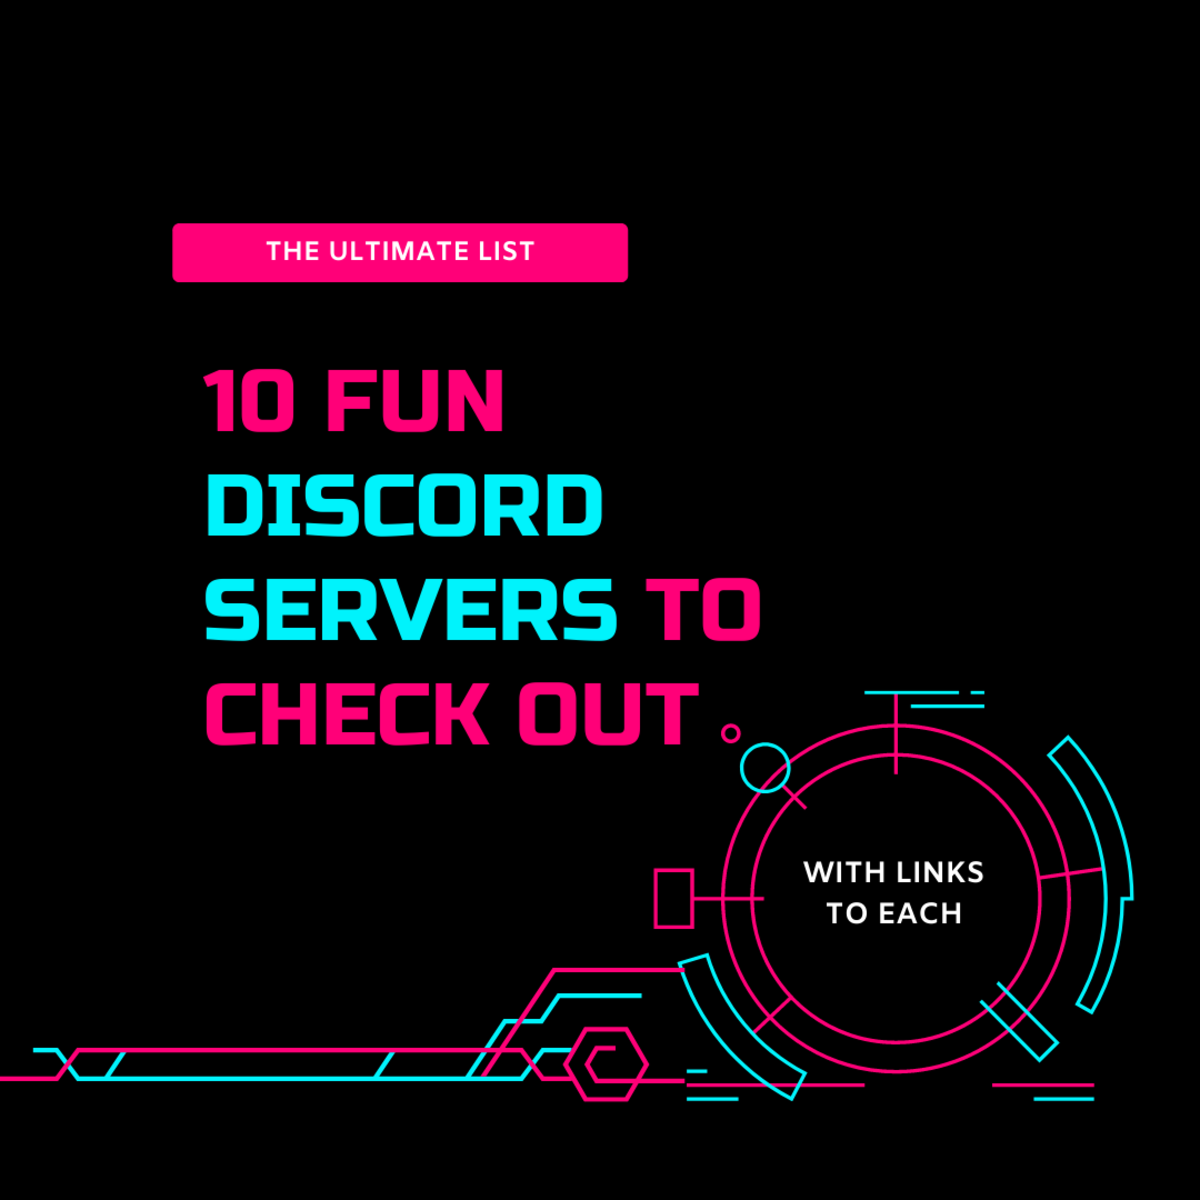 10 Fun Discord Servers to Check Out: The Ultimate List